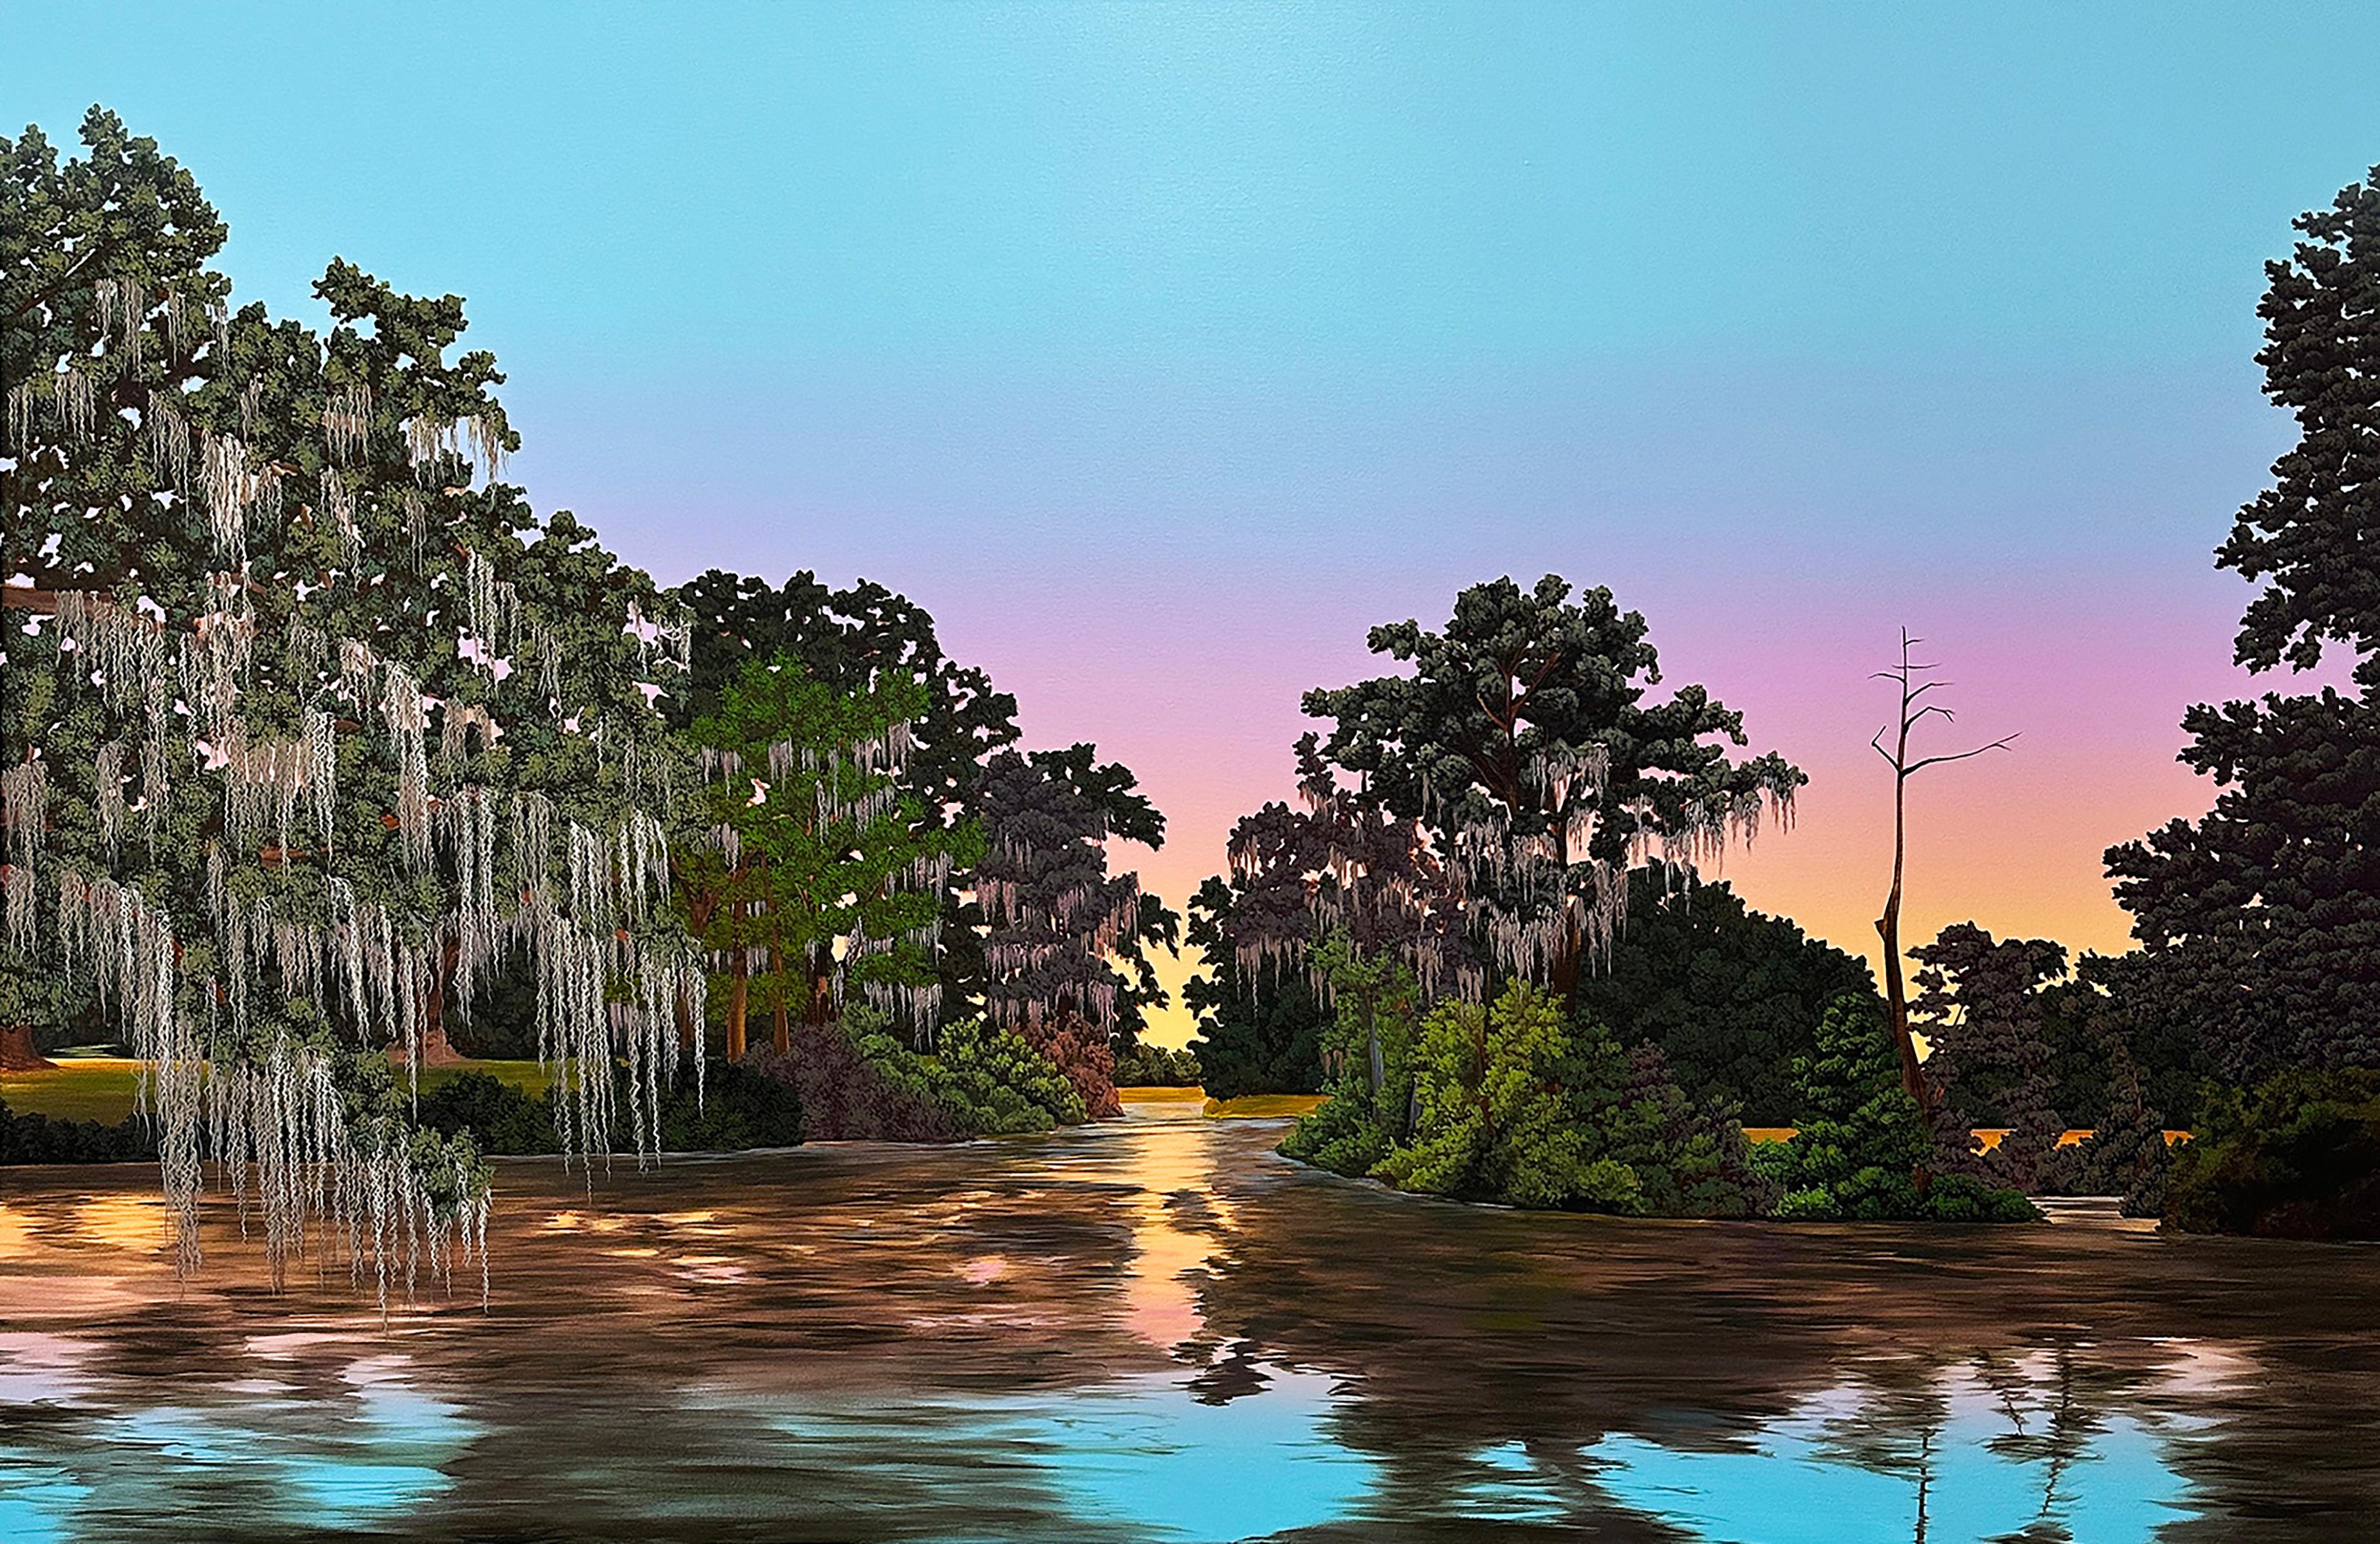 "Through the Bayou", by Kristin Moore, is a part of her 2024 solo exhibition, “Through the Bayou, Into the Garden”, at Ferrara Showman Gallery. Marking a transition from her previous work, "Through the Bayou" shows Kristin Moore directing her eye